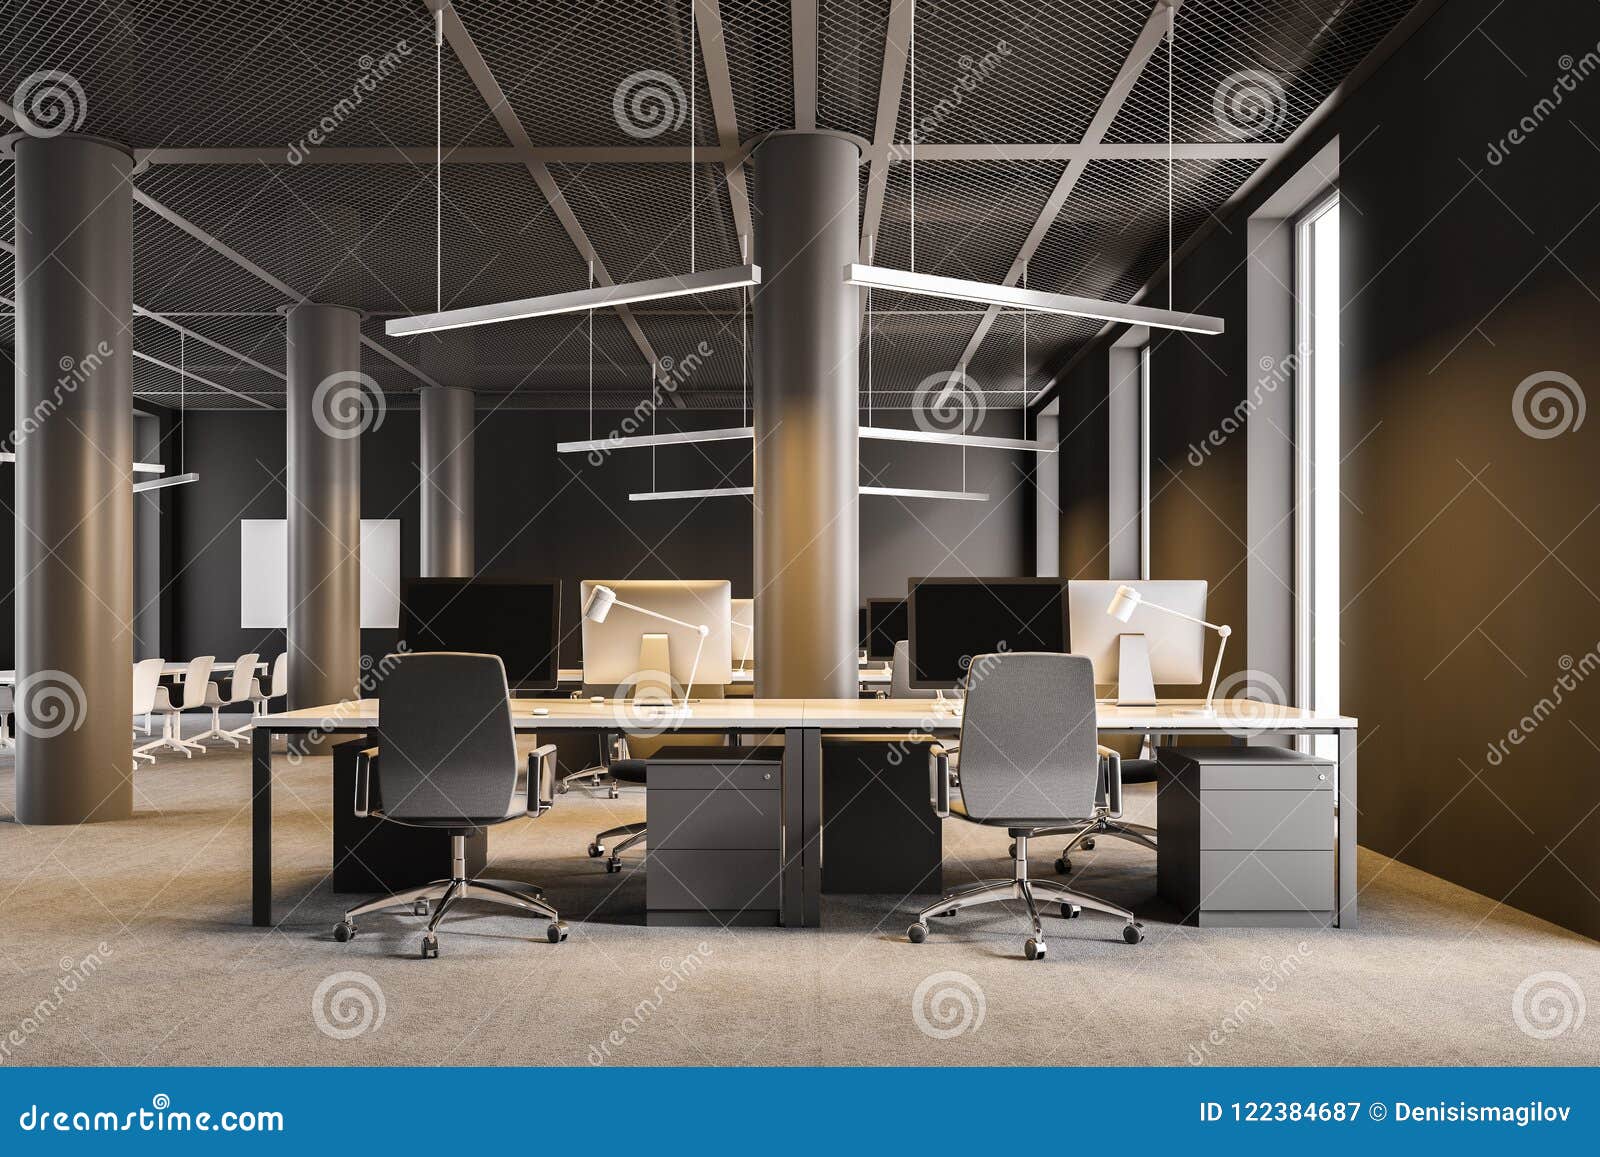 Industrial Style Brown Office Interior Stock Illustration